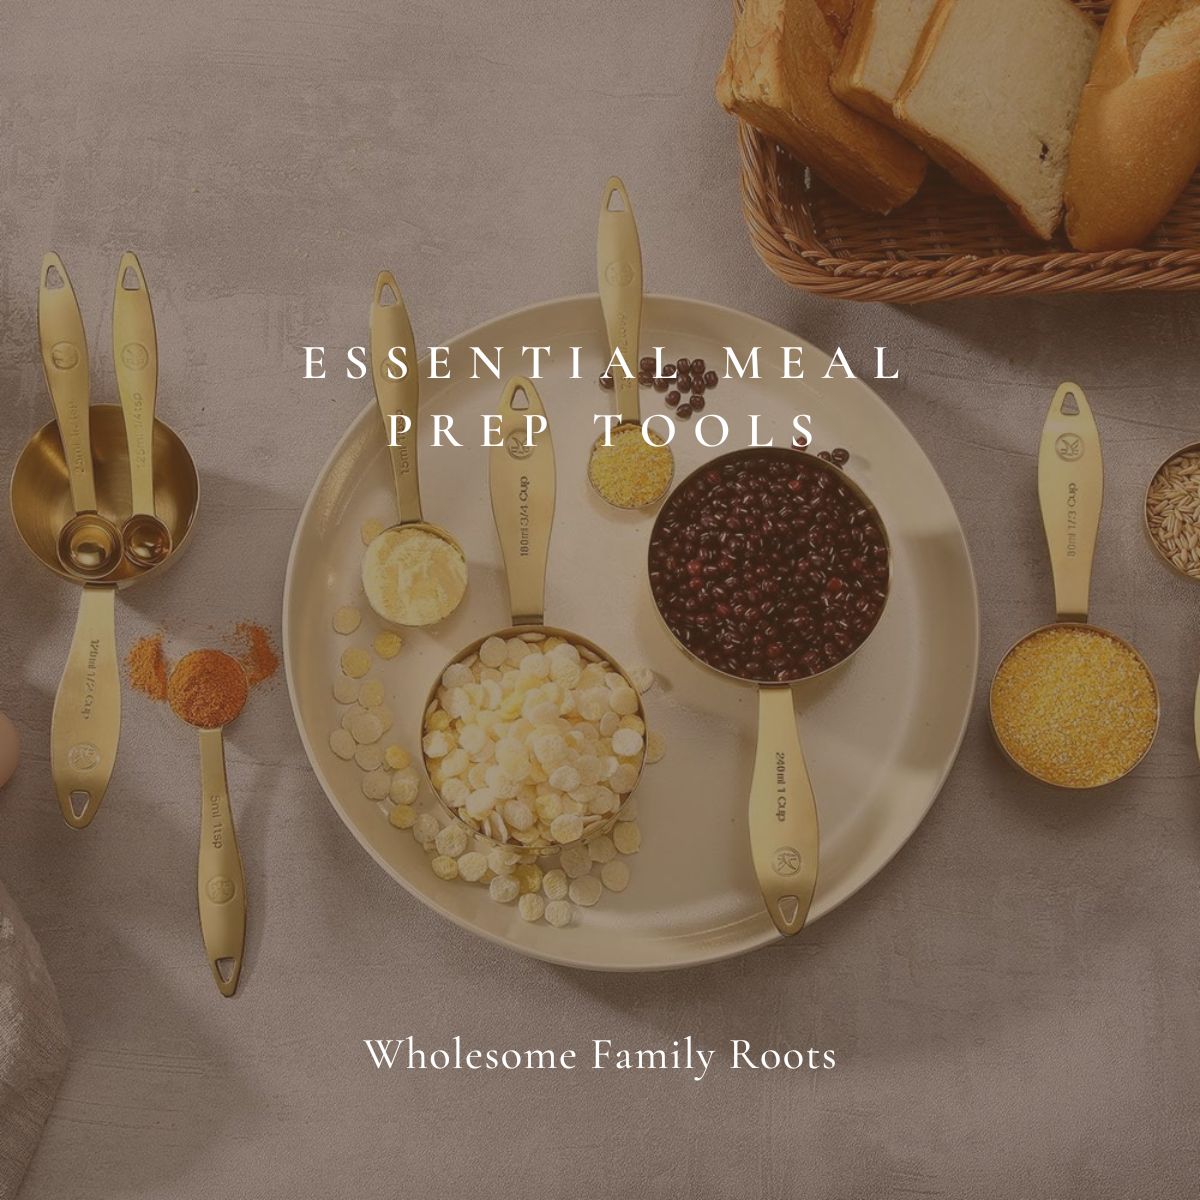 Essential Meal Prep Tools - Wholesome Family Roots